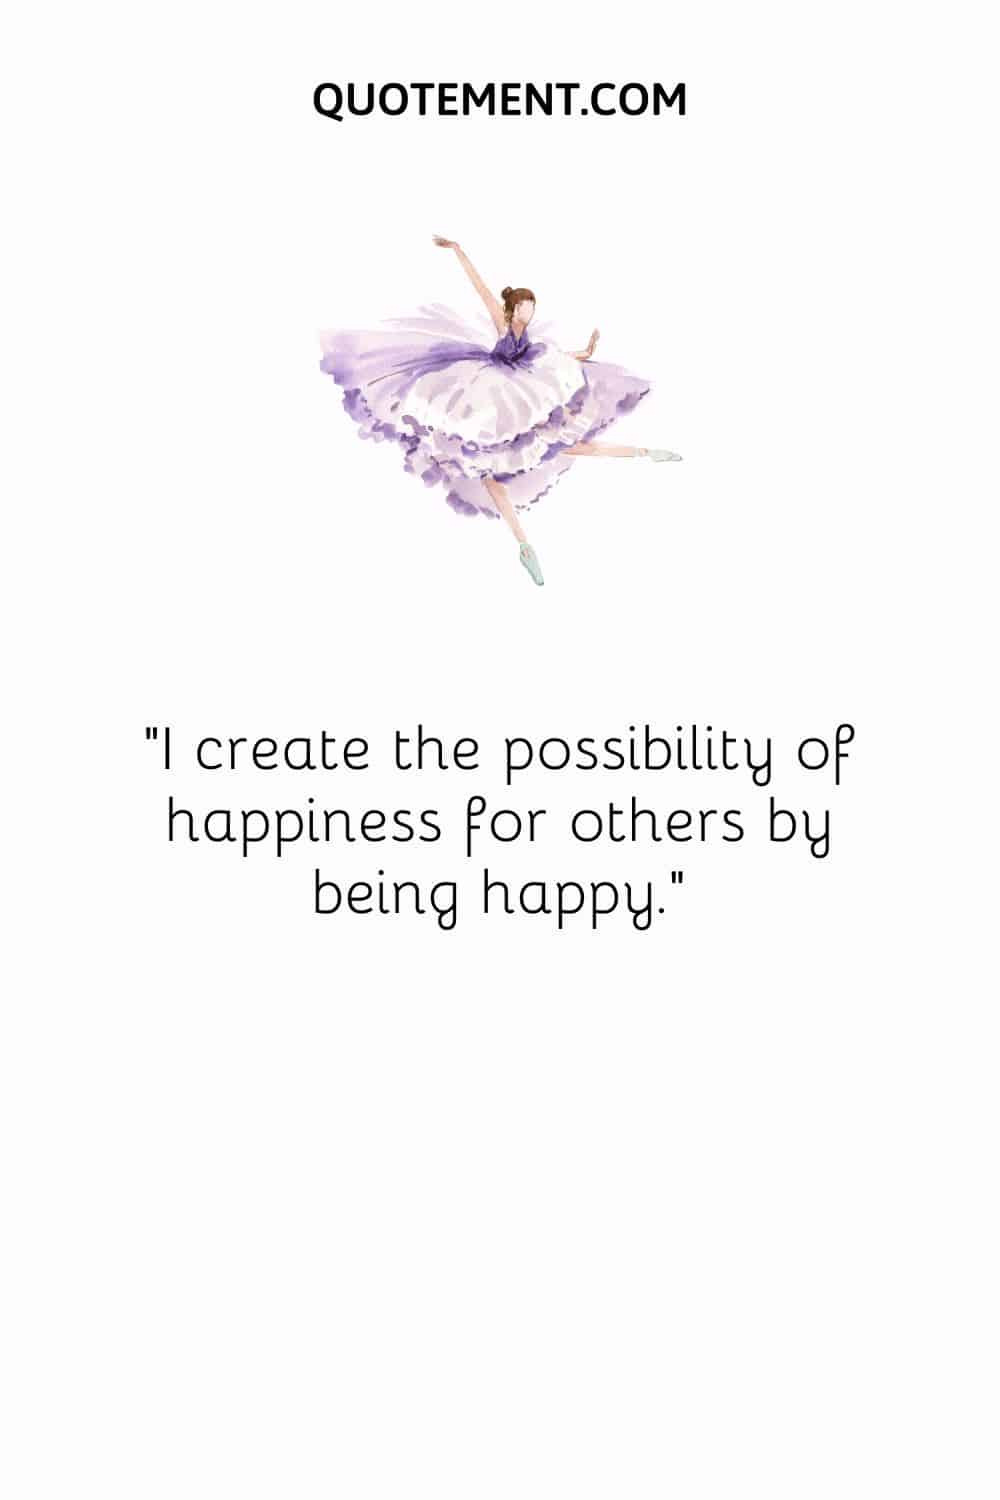 I create the possibility of happiness for others by being happy